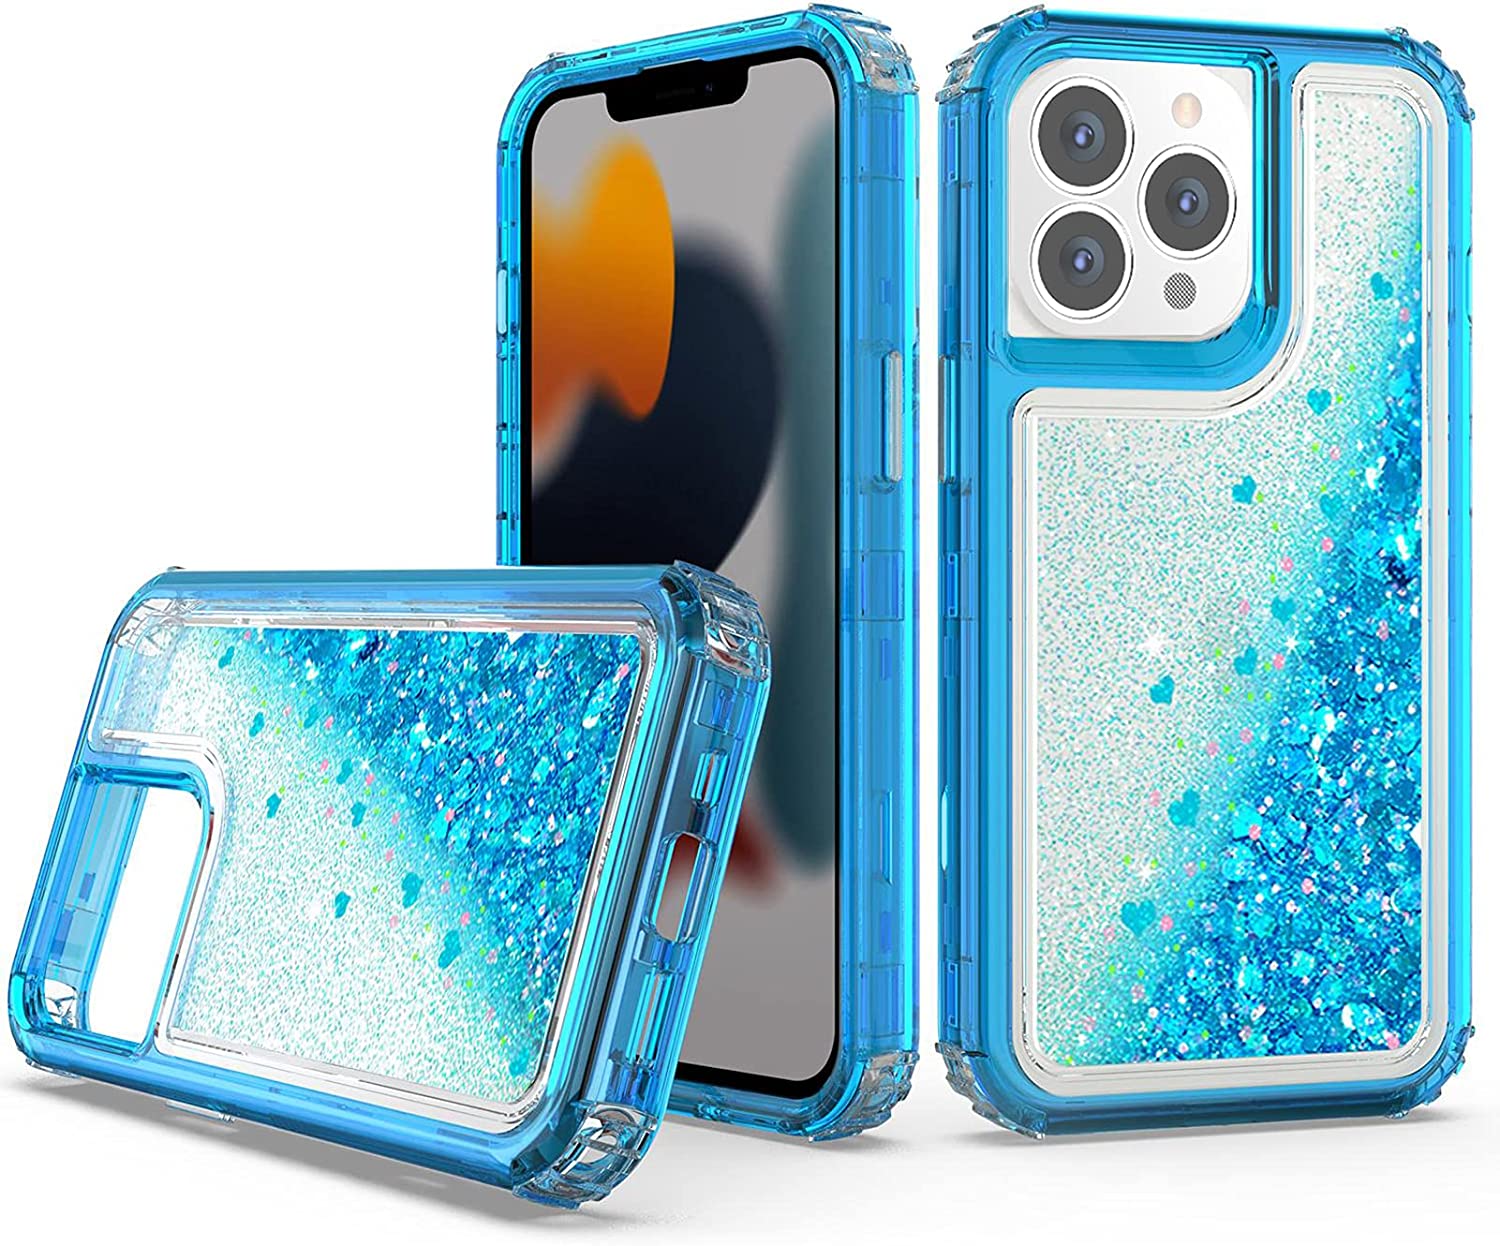 Hybrid Glitter Case For Iphone 11 Pro Max 6.5"